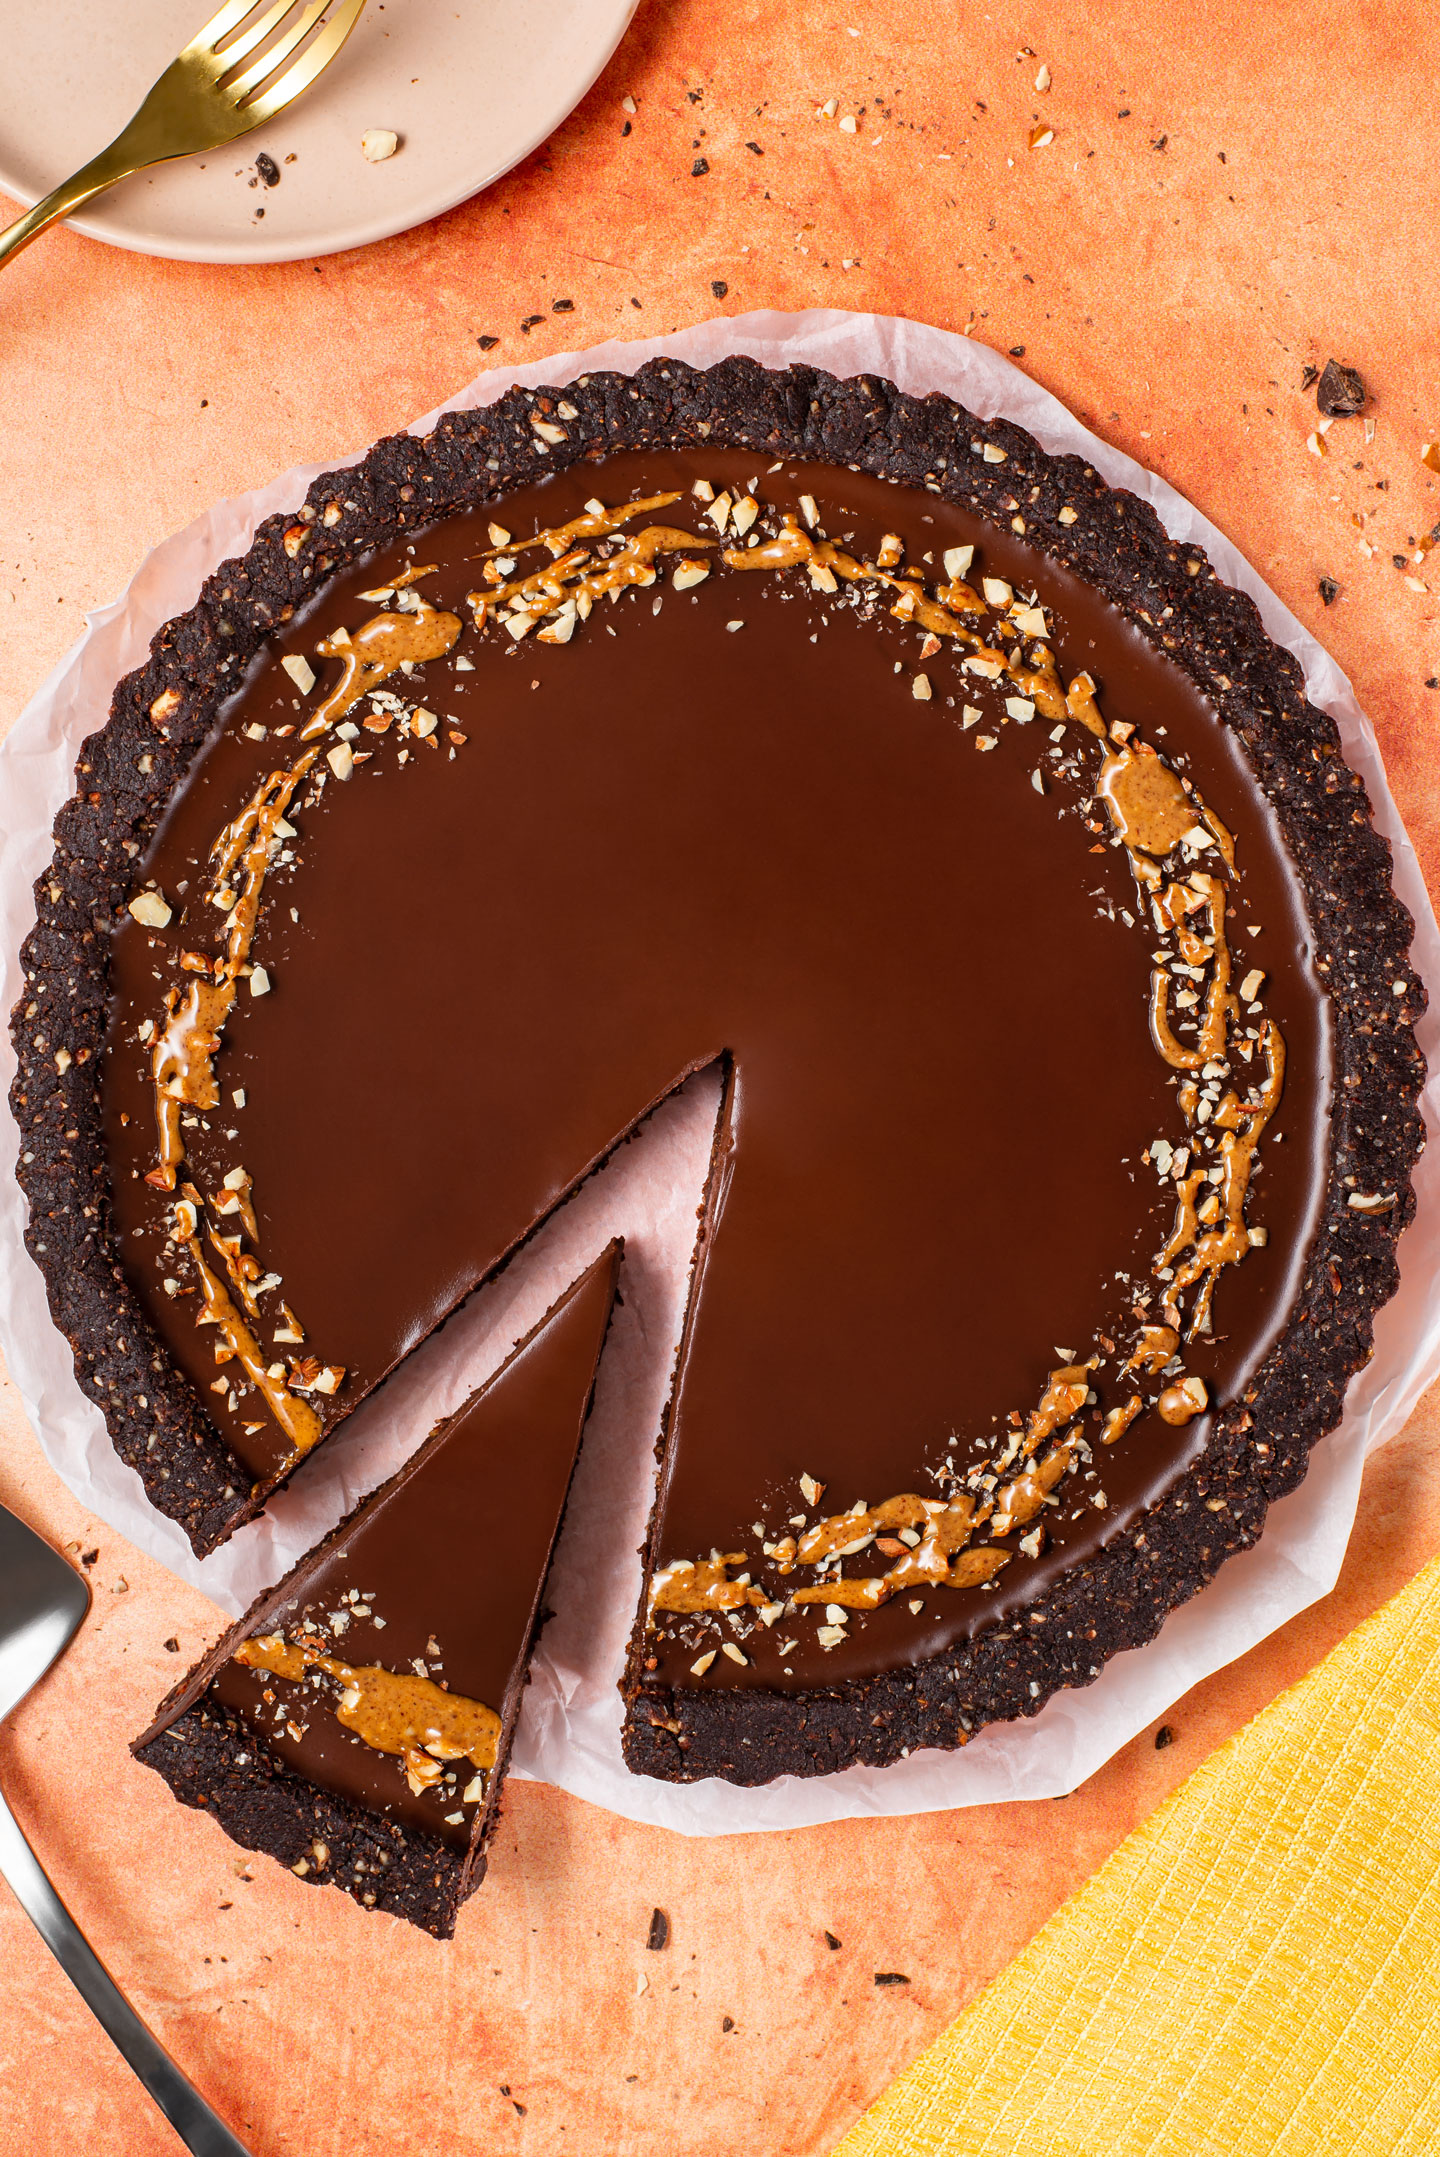 A rich vegan chocolate almond tart with a smooth chocolate filling and one slice pulled away.